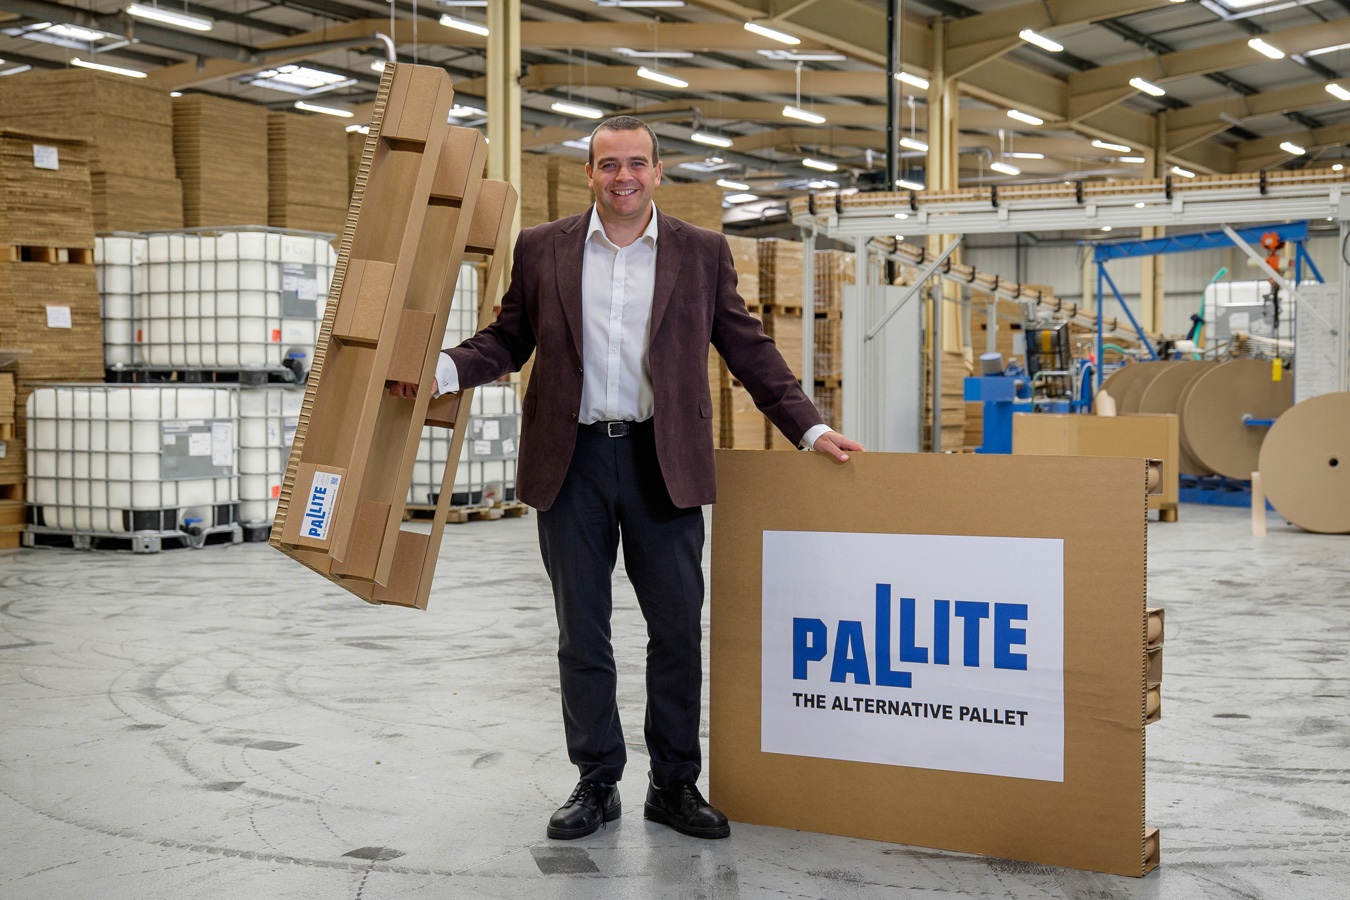 Sales Director David Rose demonstrates the PALLITE products